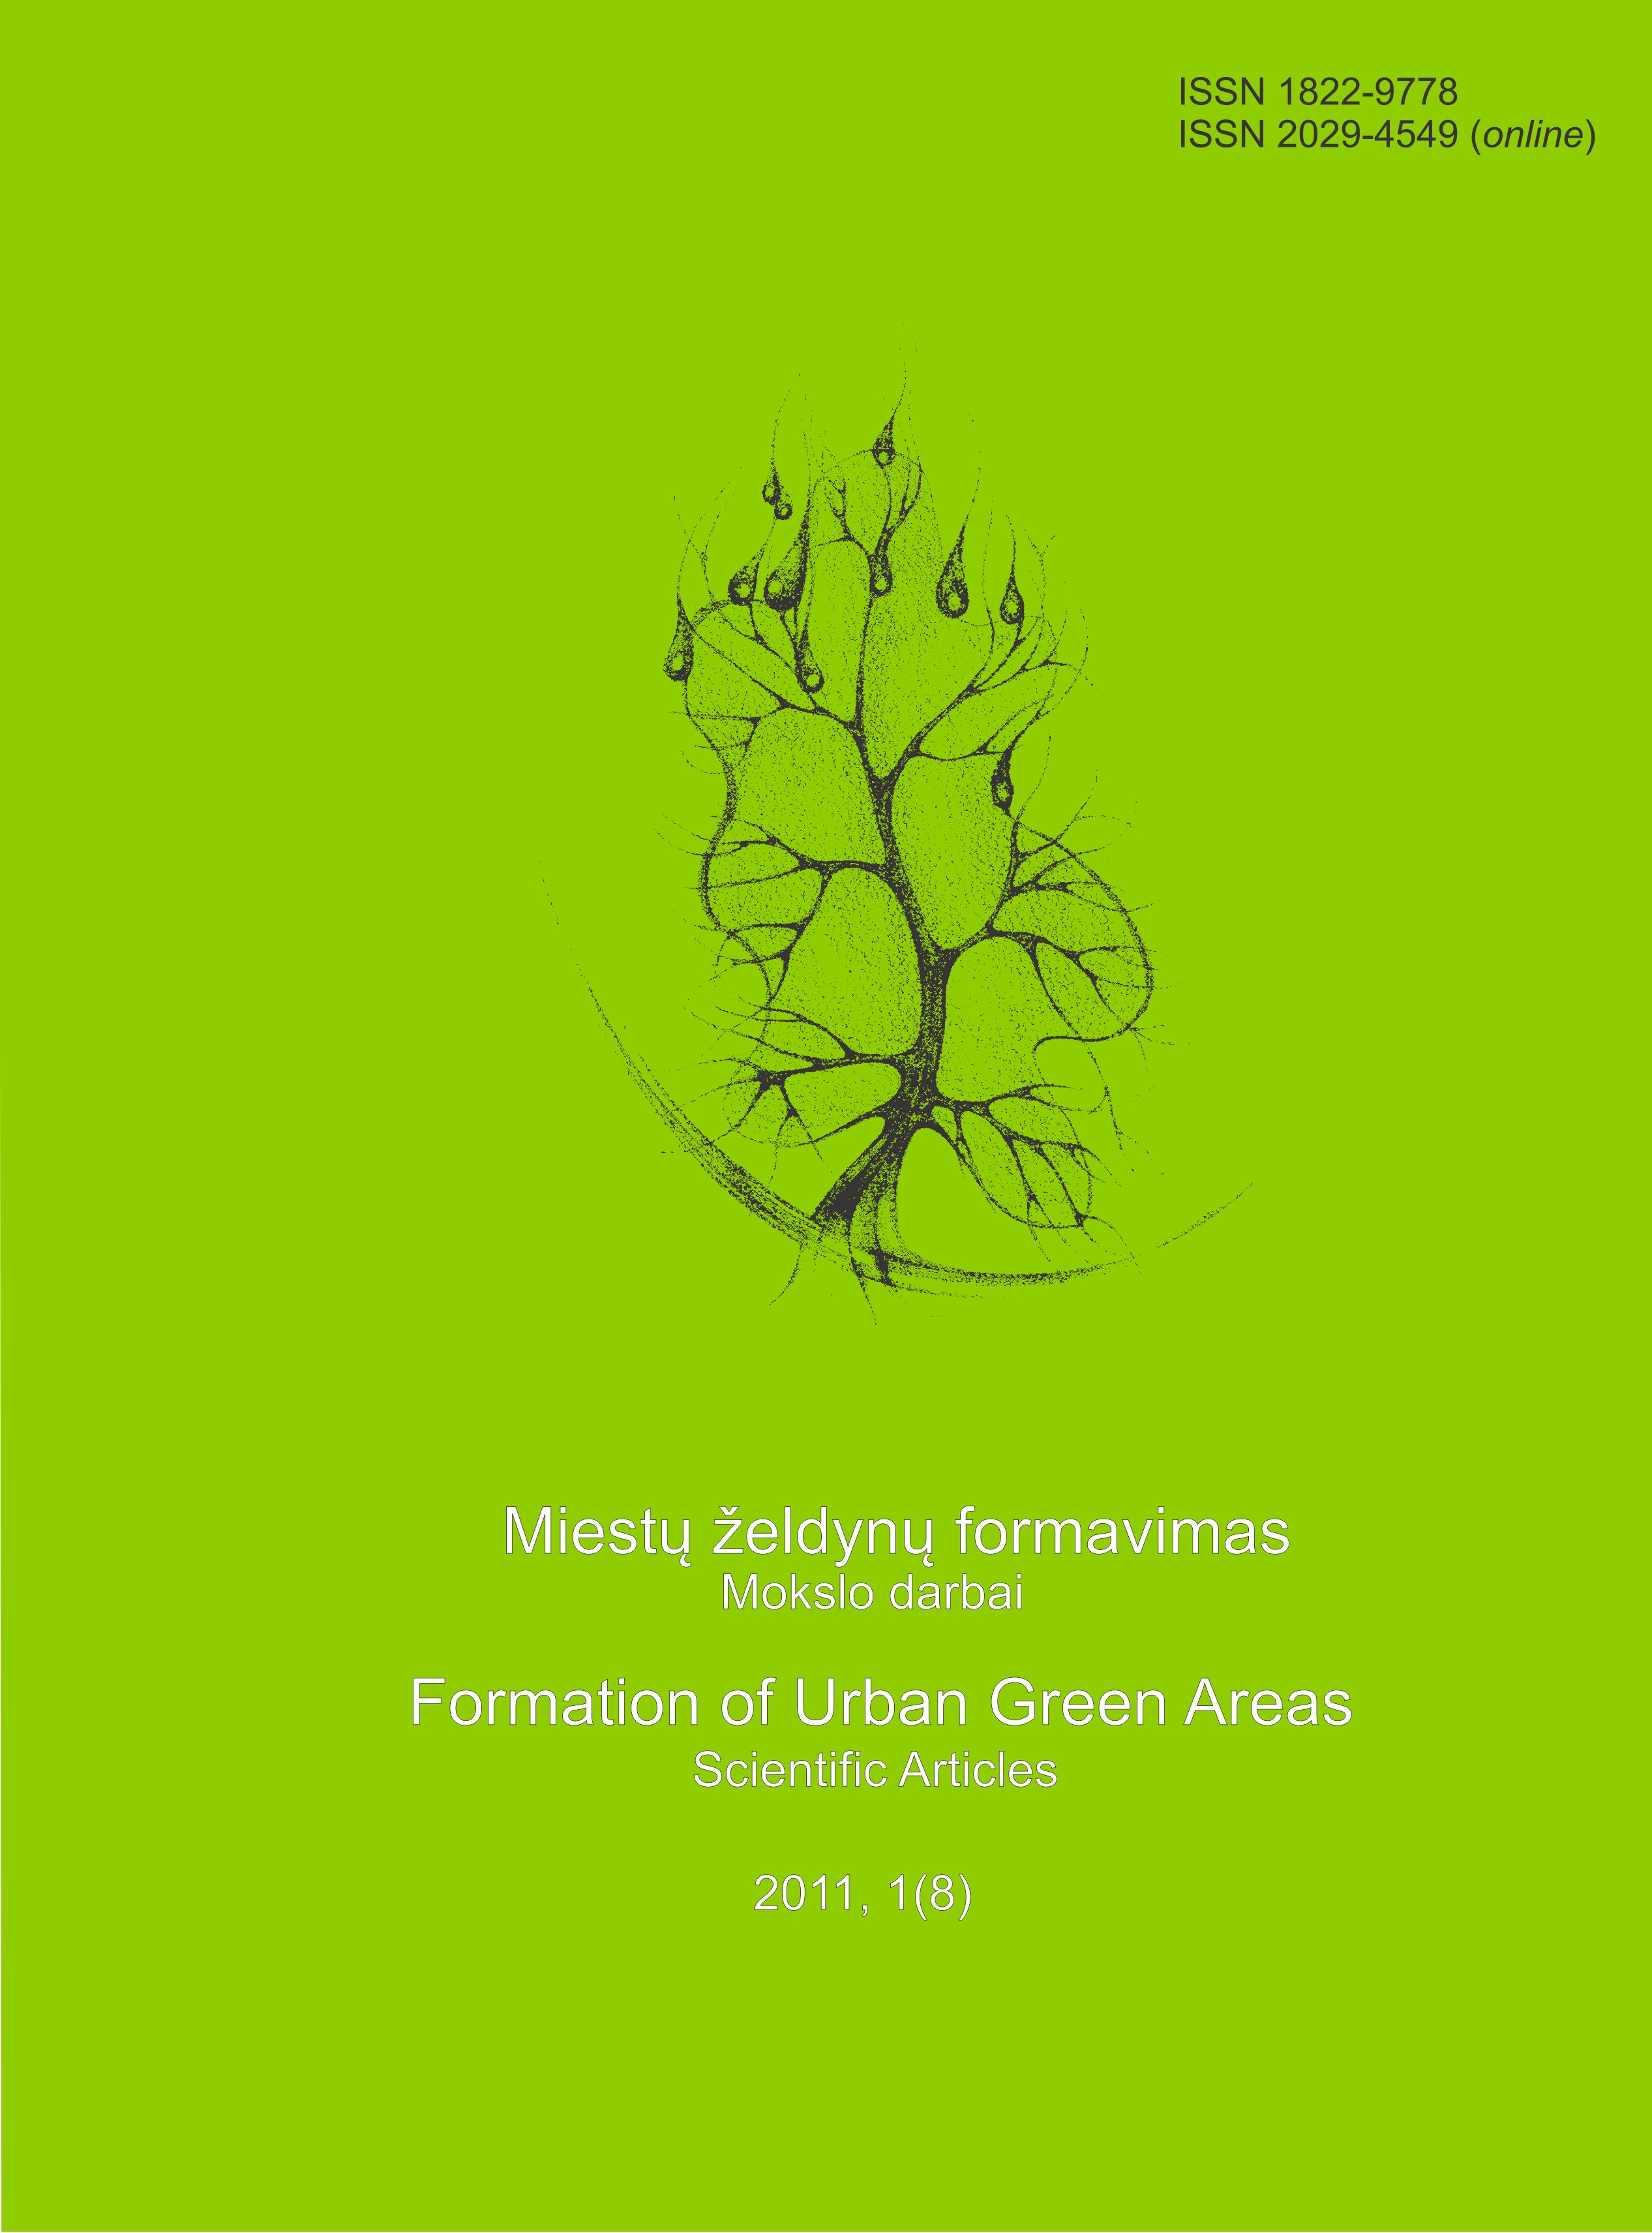 					View Vol. 8 No. 1 (2011): FORMATION OF URBAN GREEN AREAS
				